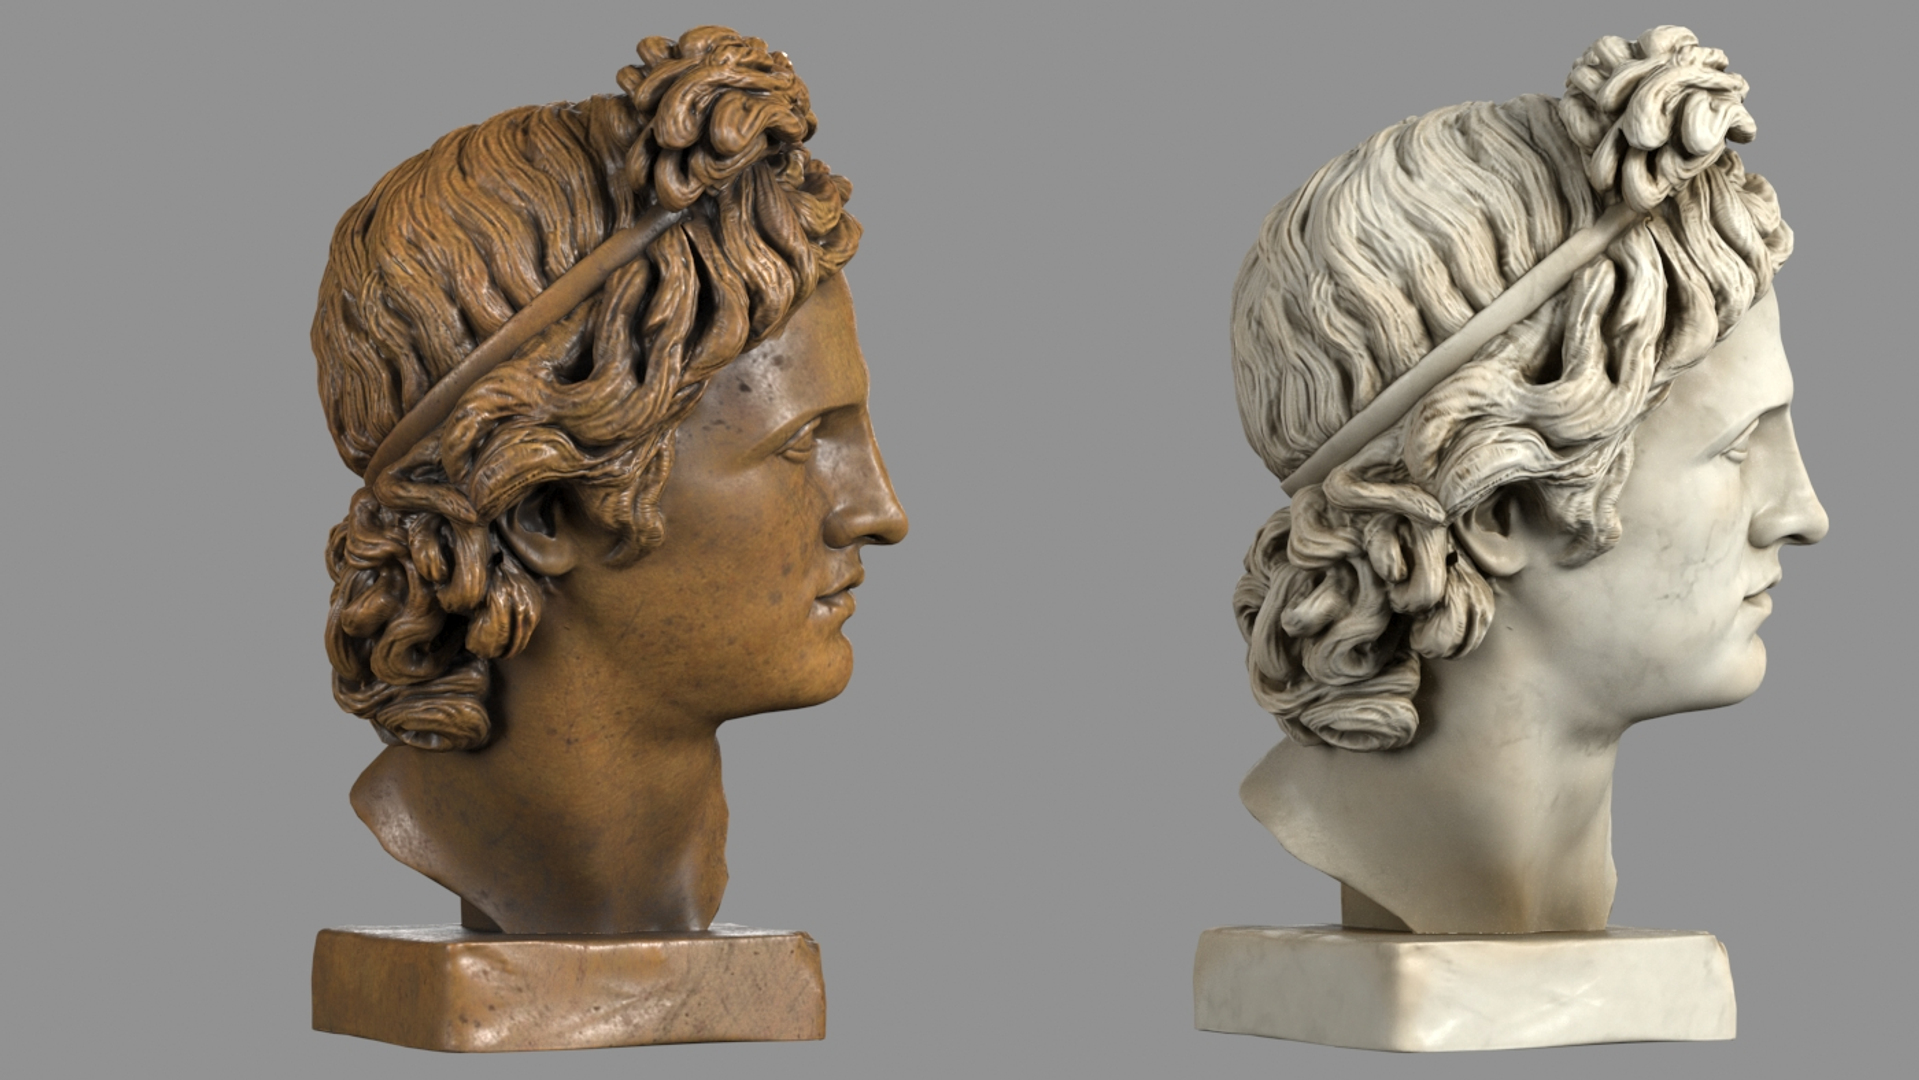 Concept illustration of classical head bust sculpture from 3D